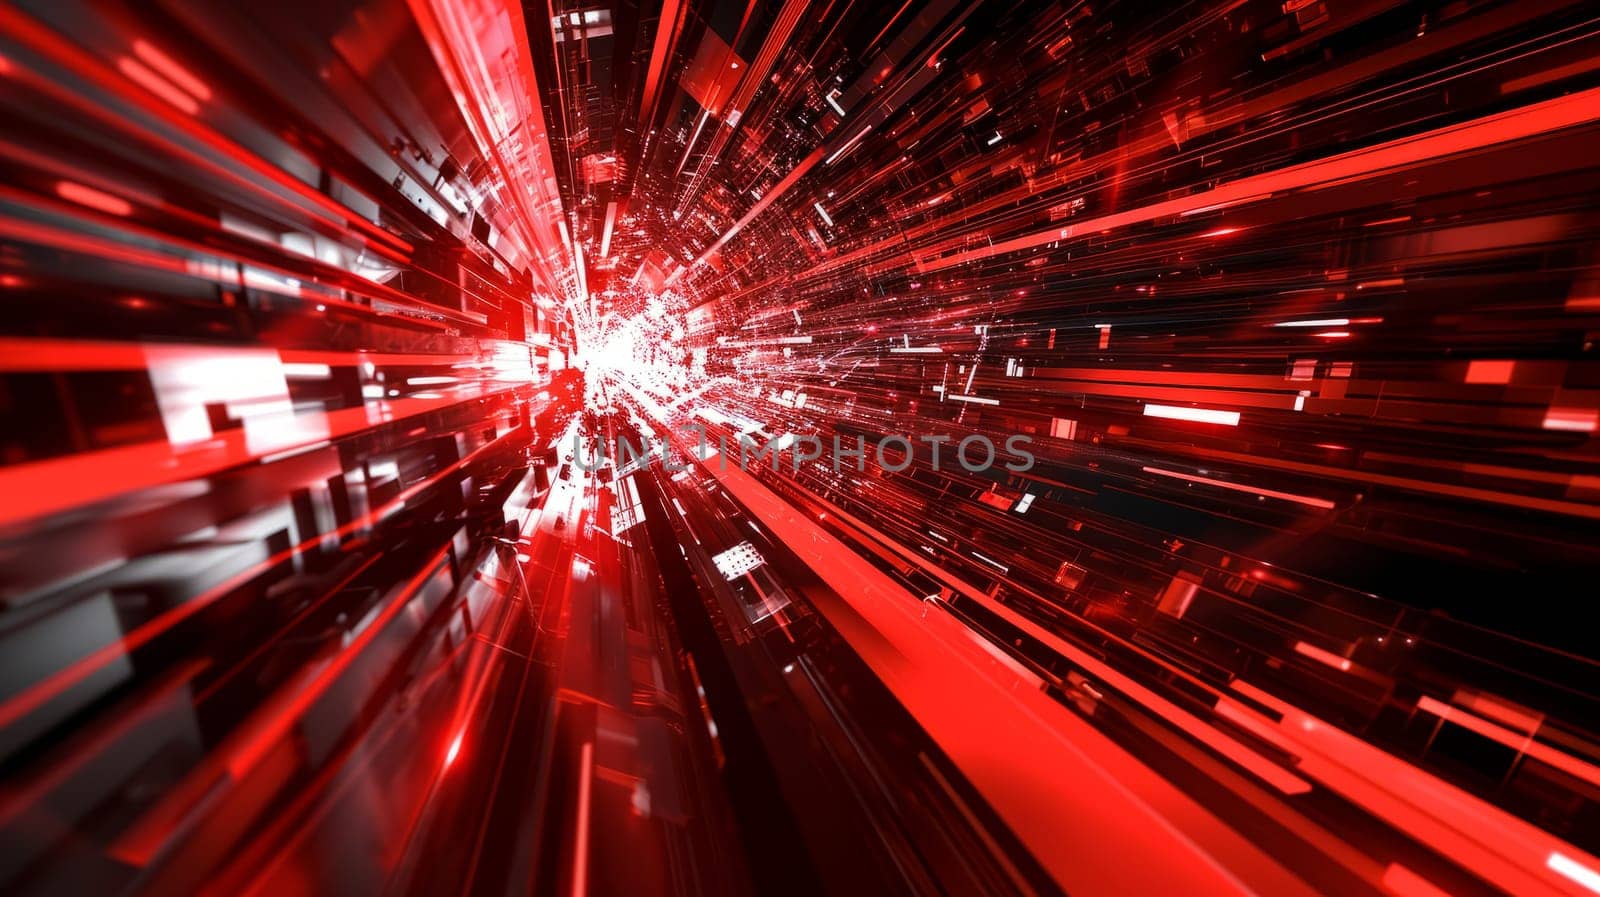 Network technologies. Futuristic tech red background 3d illustration with glowing particles AI